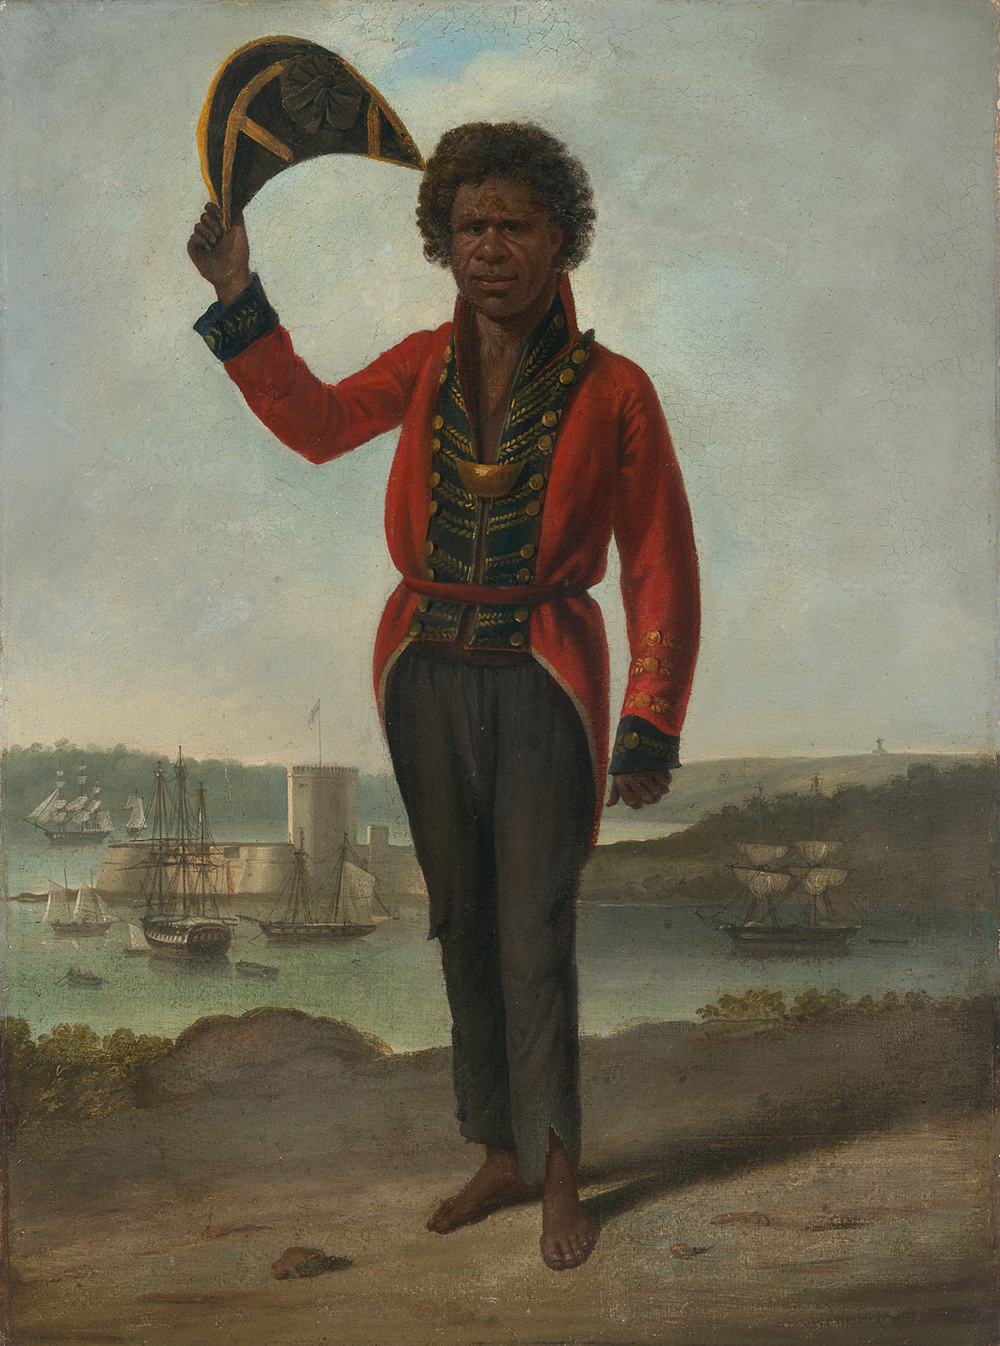 Portrait of Bungaree, a native of New South Wales, by Augustus Earle, c. 1826.